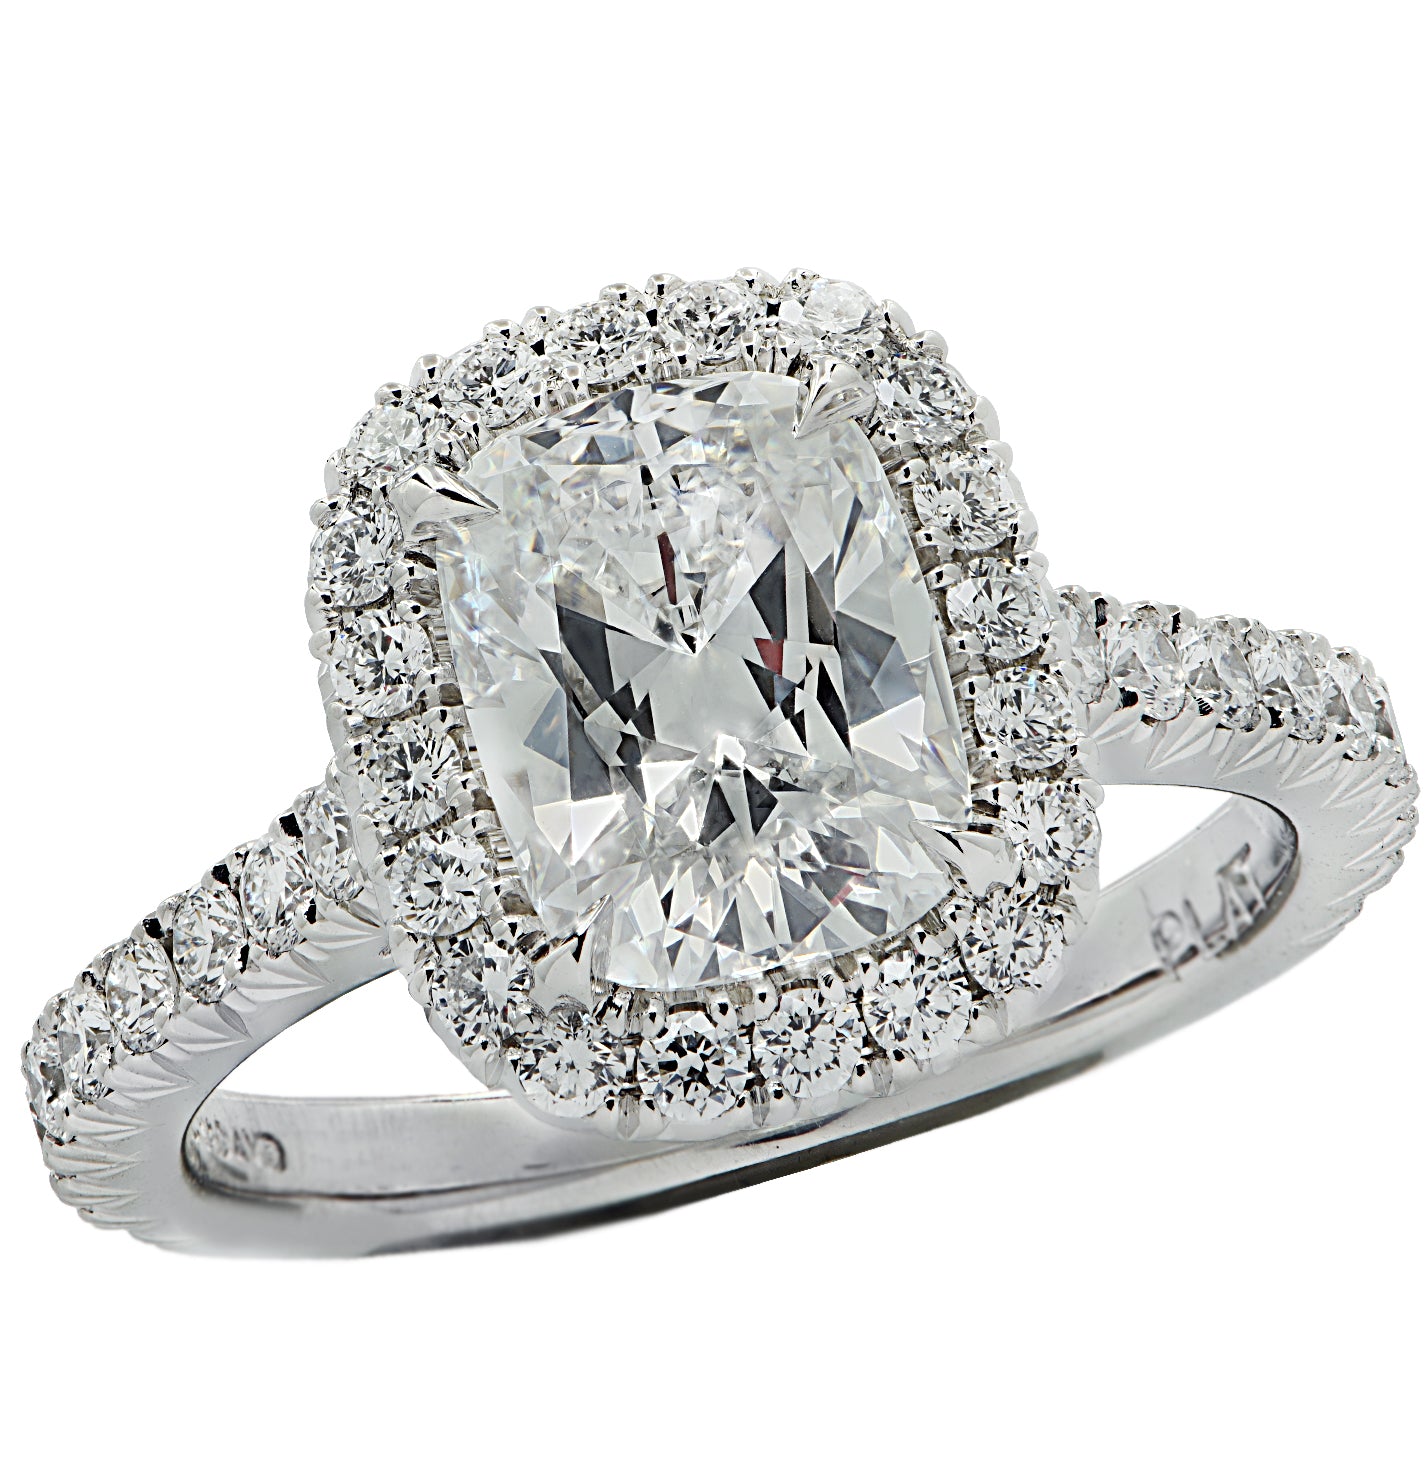 Platinum or White Gold: Making the Perfect Choice for Your Engagement Ring.